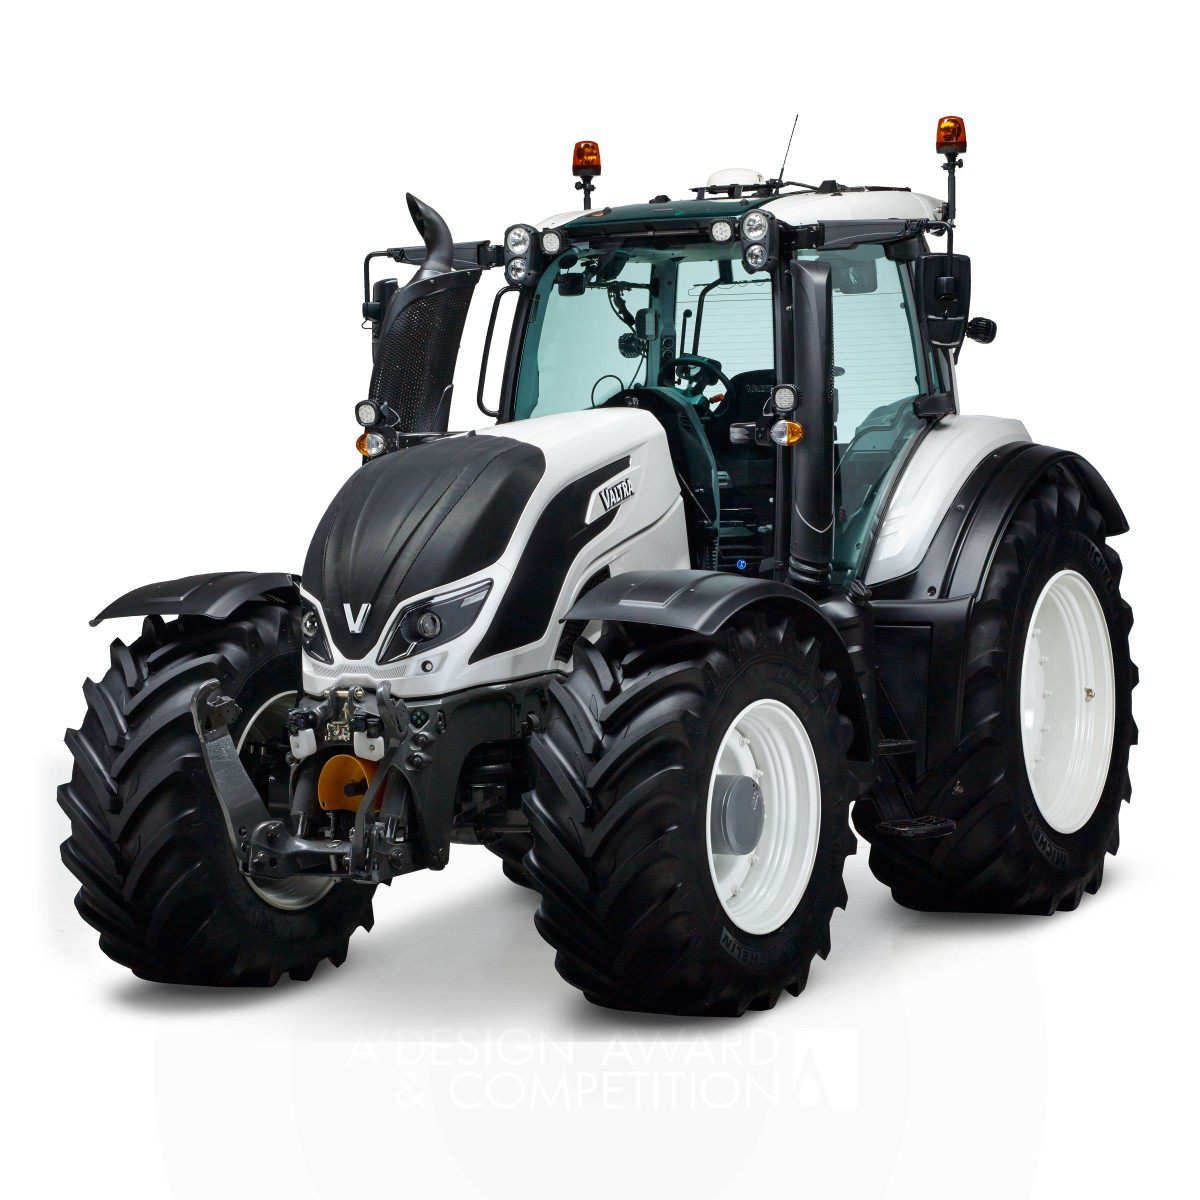 Valtra T4-Series Multifunctional Tractor by Kimmo Wihinen